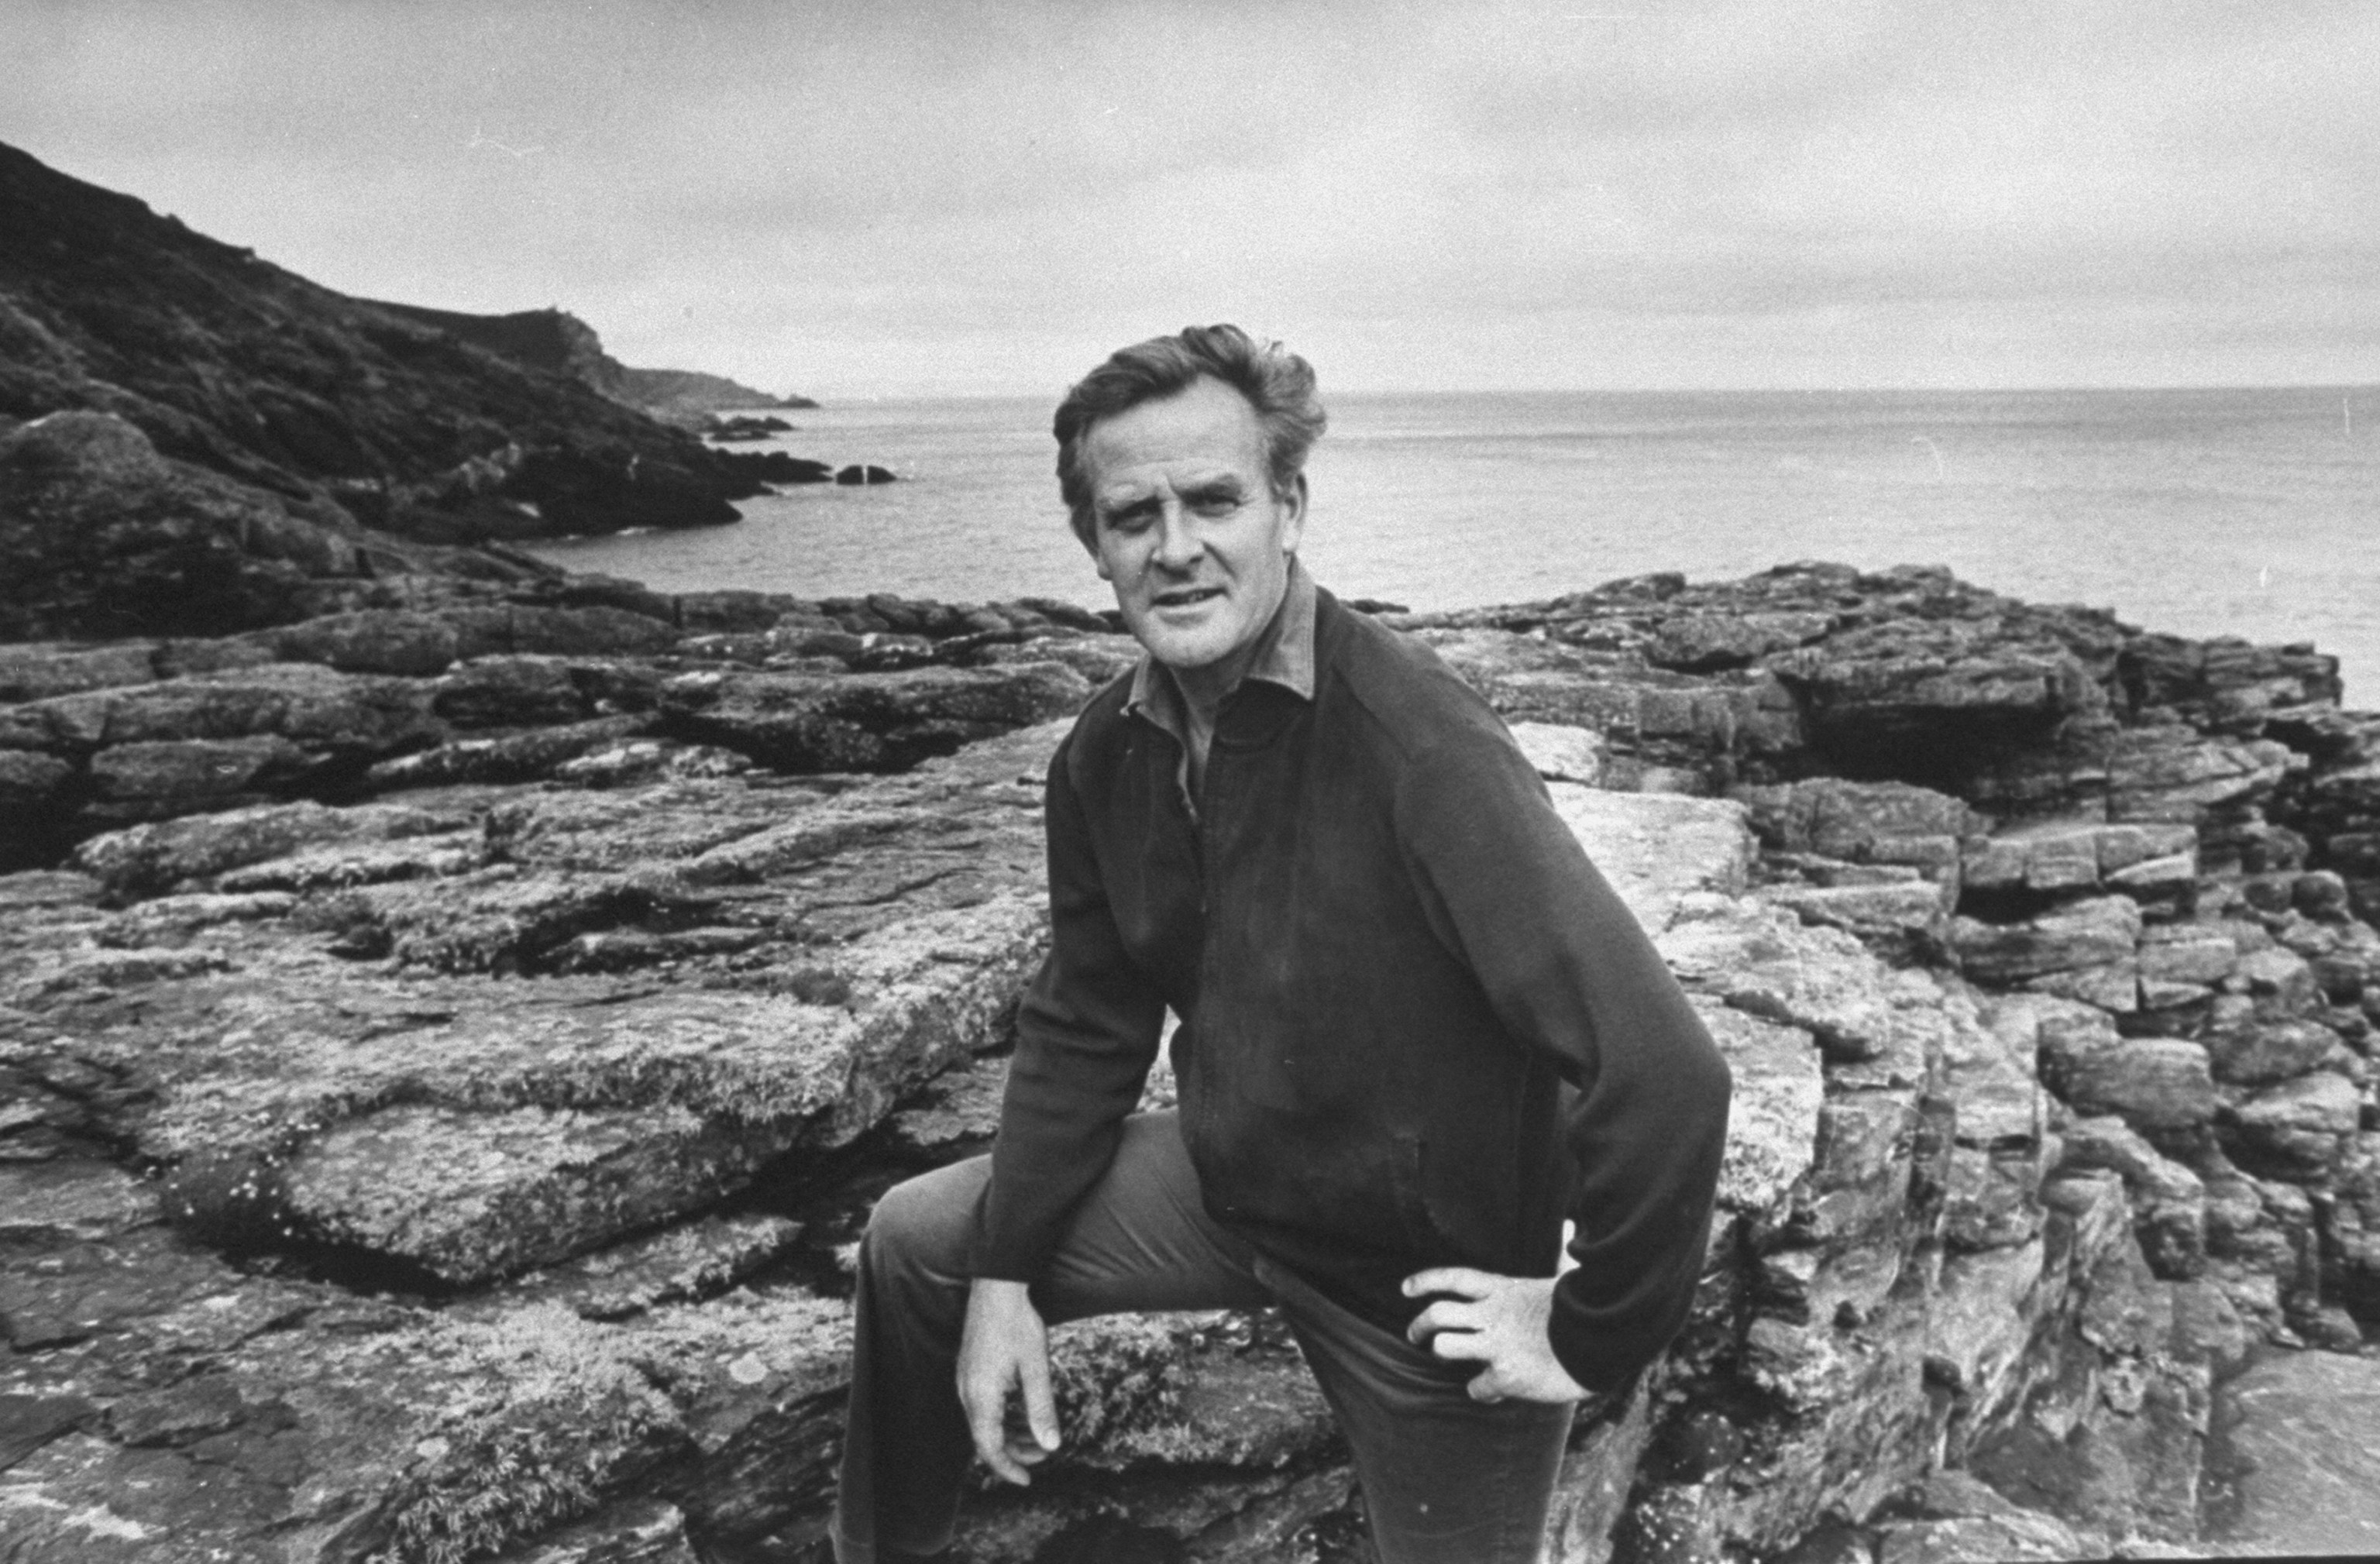 John Le Carré, in 1974, the year he first visited Hong Kong with the idea of setting one of his Cold War spy novels in the East. The book that resulted, “The Honourable Schoolboy”, featured characters based on people he met there. Photo: Ben Martin/The LiFE Images Collection/Getty Images